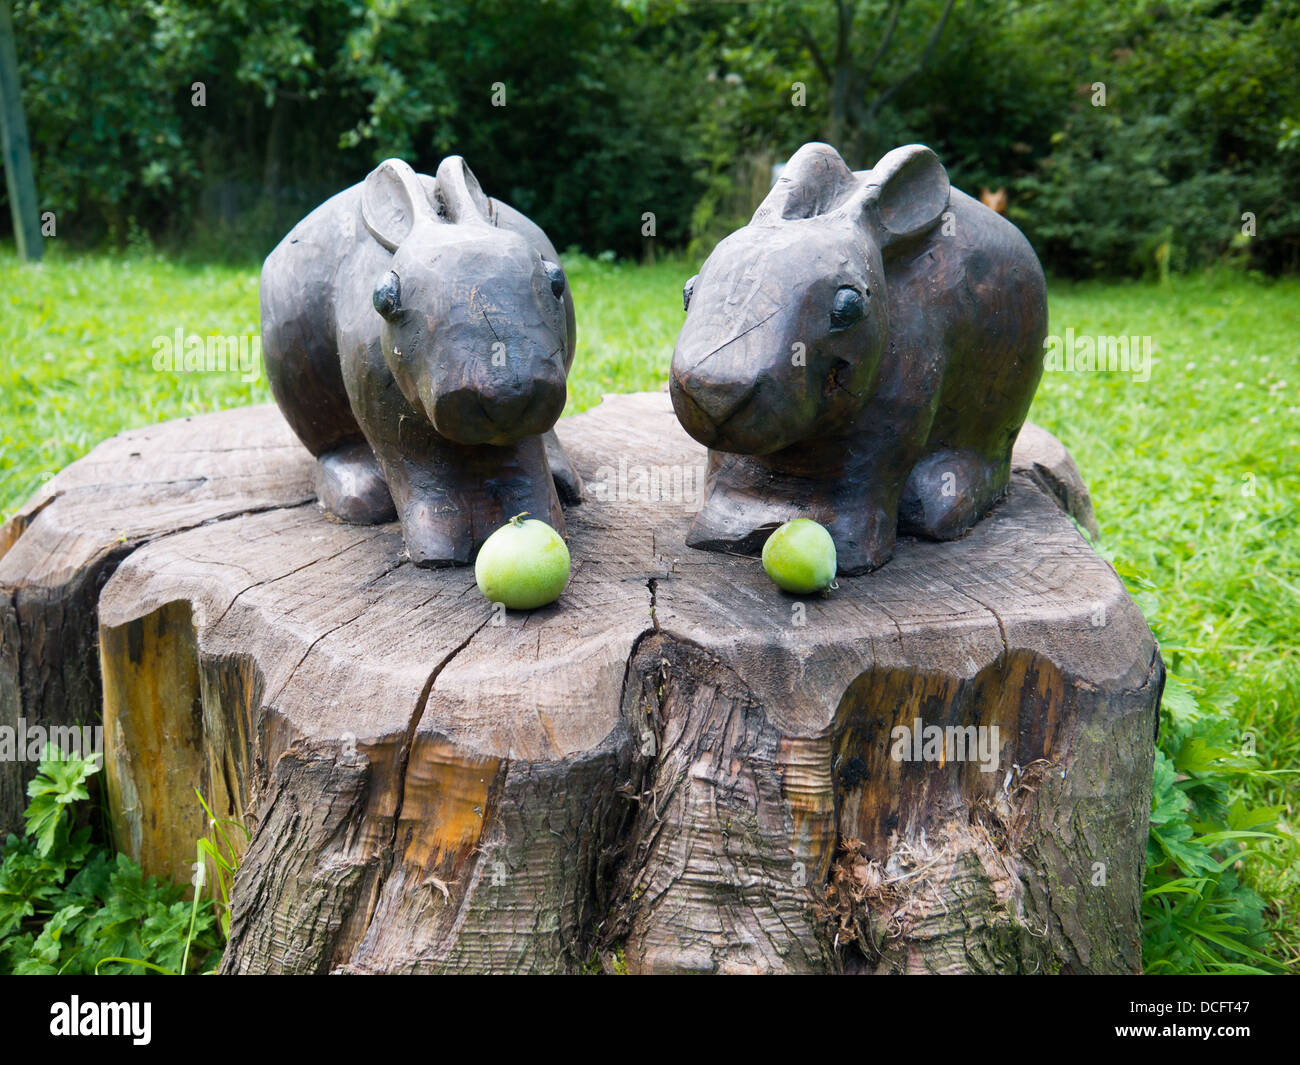 Two wooden rabbits sitting on a tree stump pretending to eat apples. Stock Photo